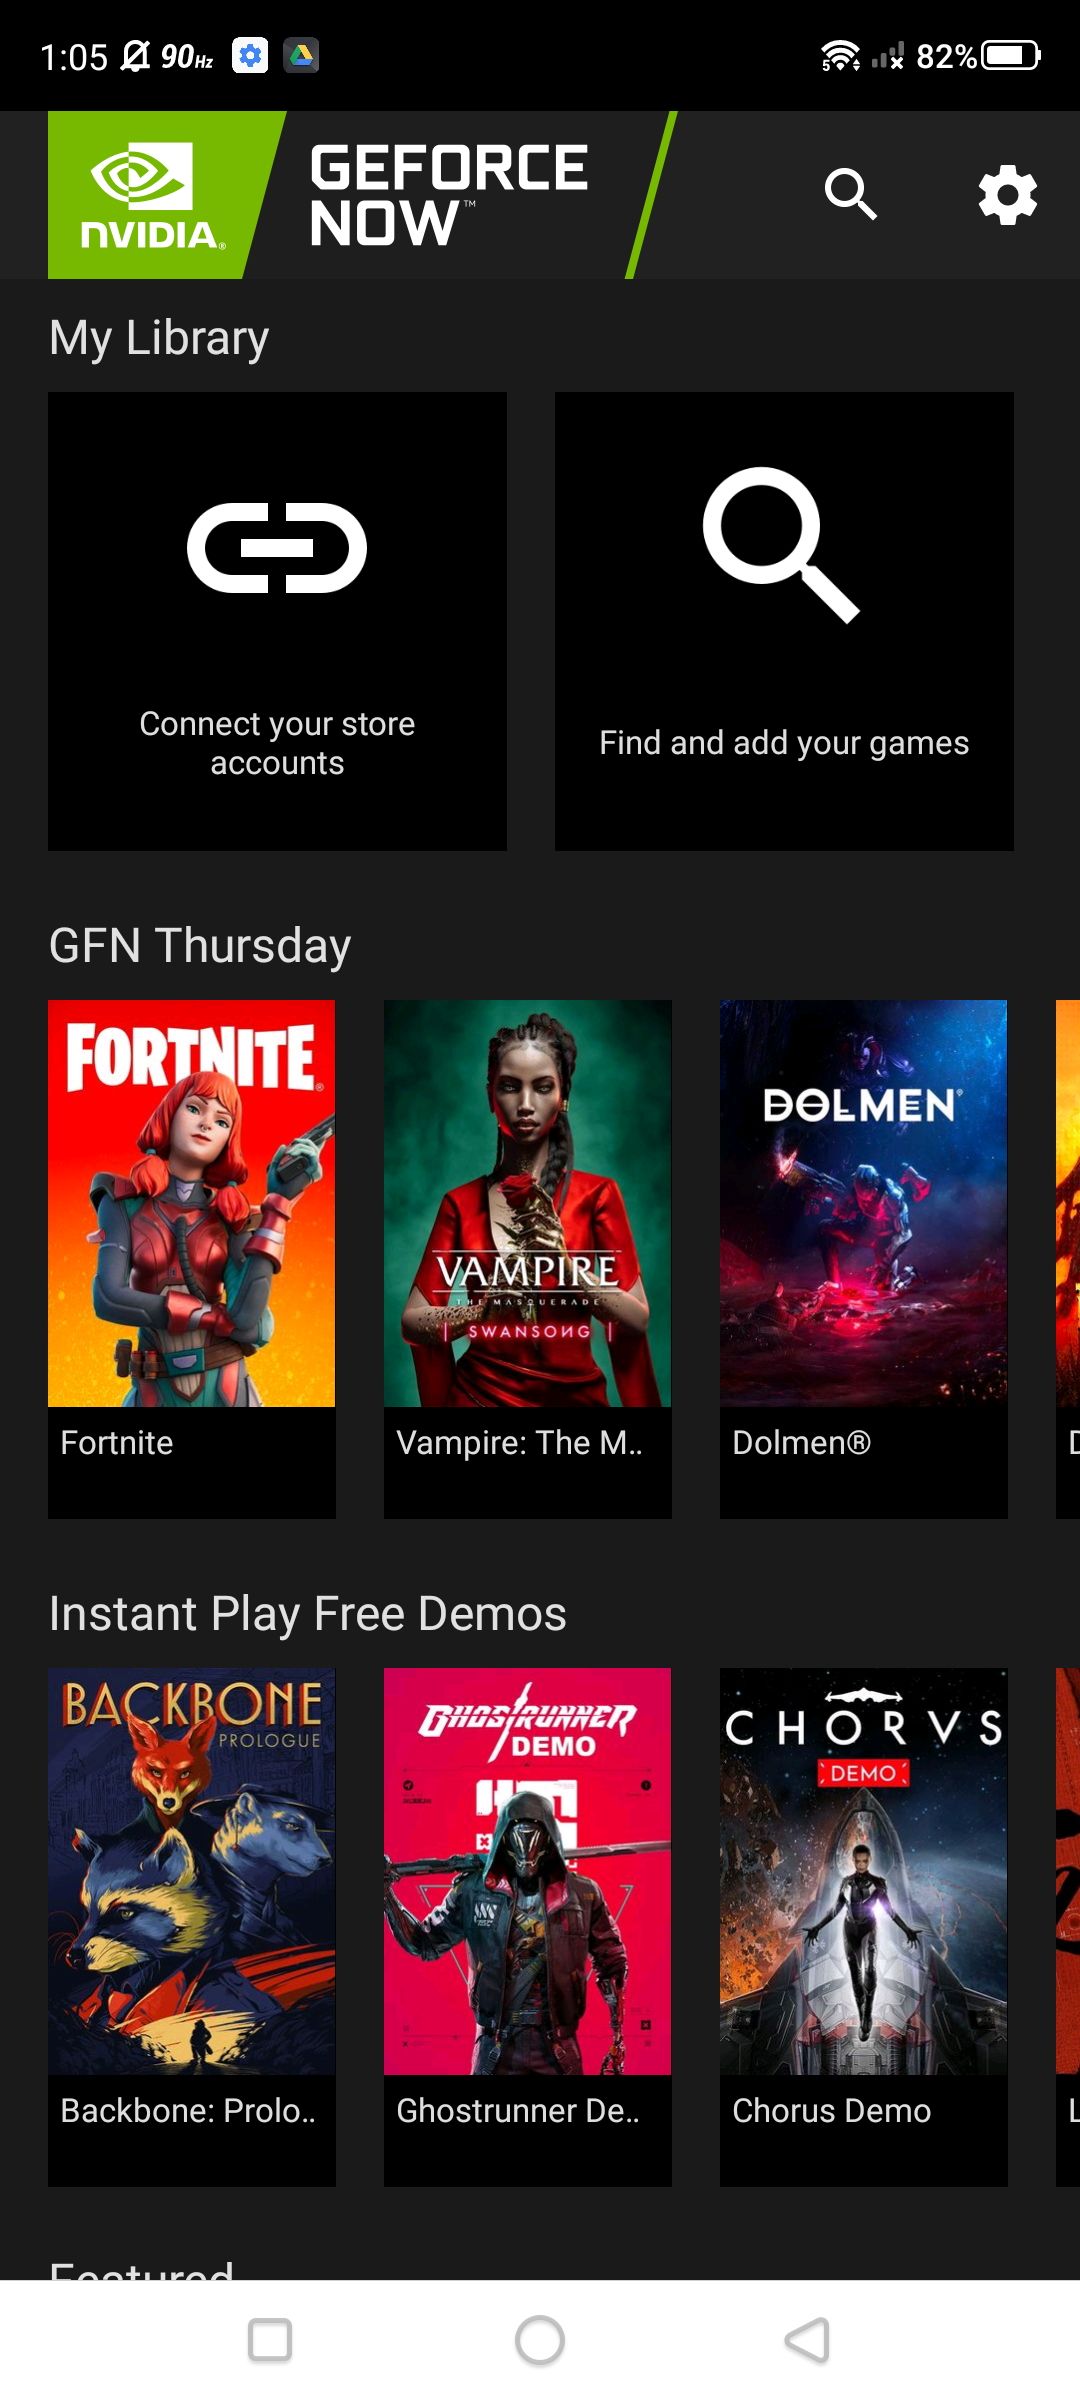 GeForce Now game selection page